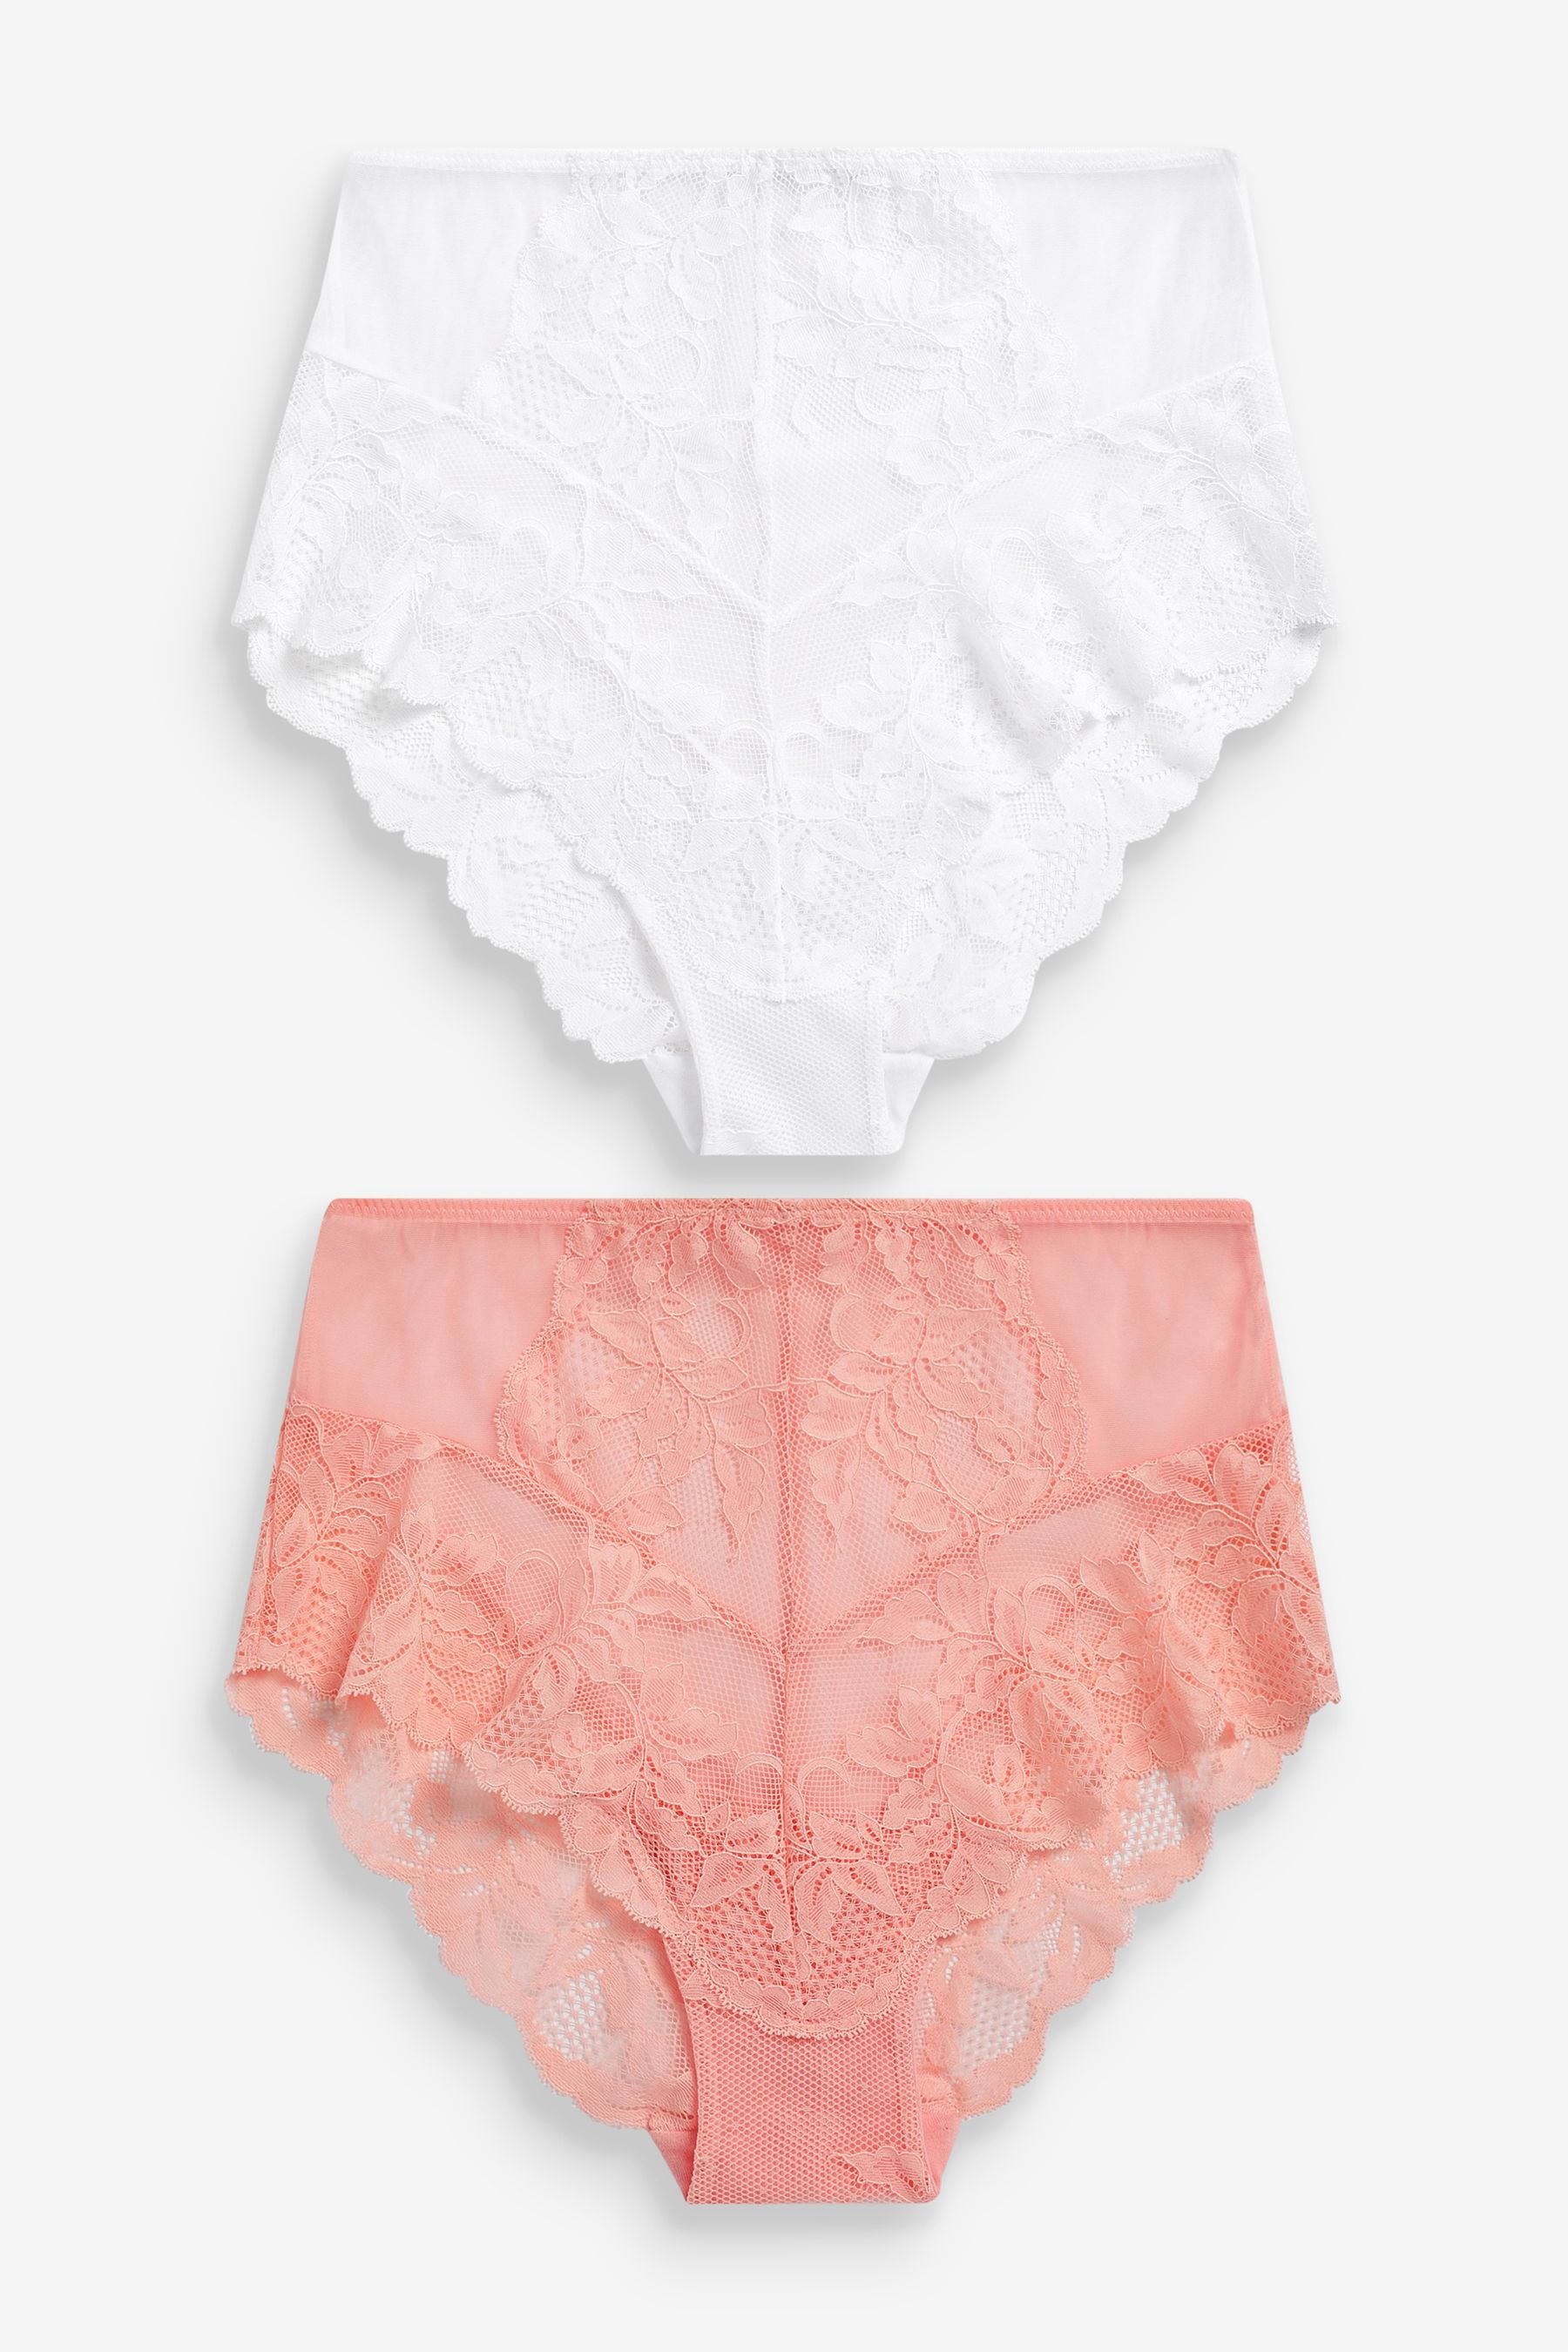 Lace Knickers 2 Pack High Rise